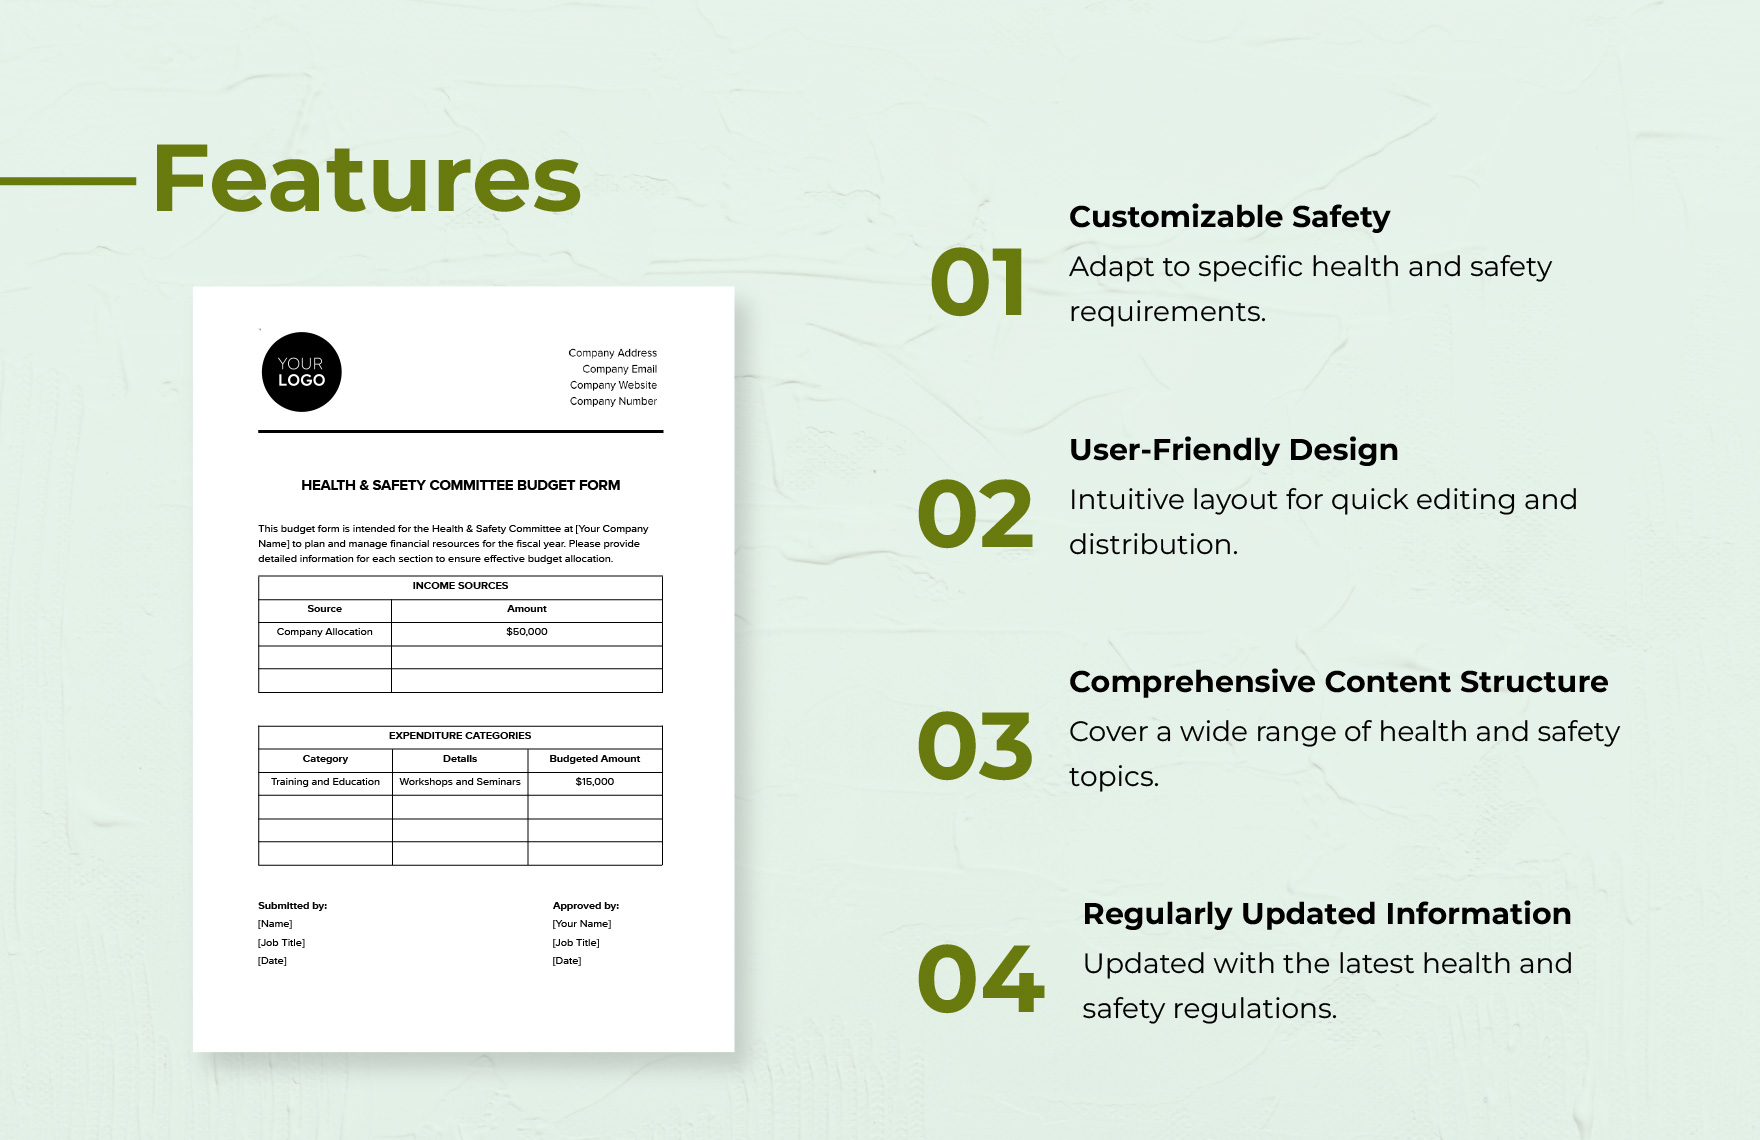 Health & Safety Committee Budget Form Template